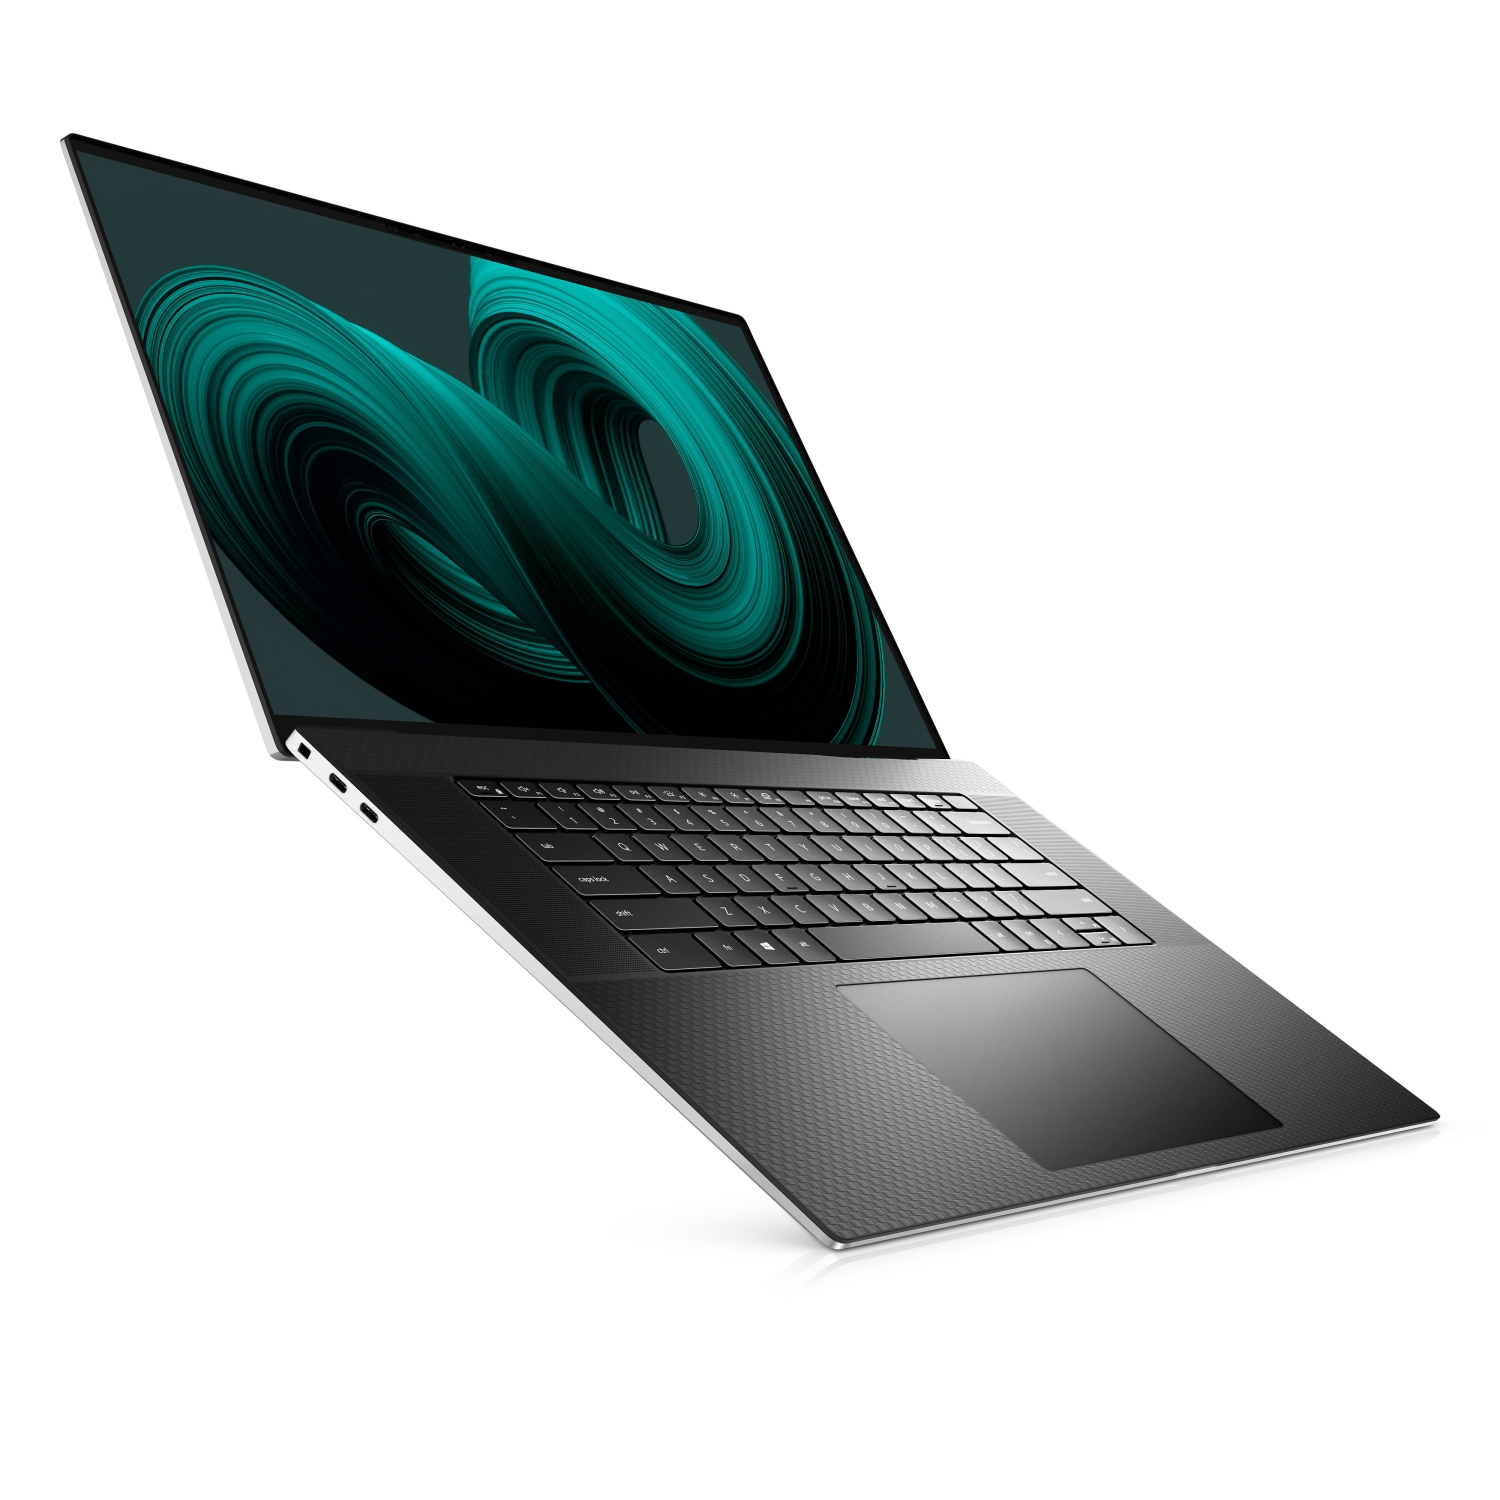 Refurbished (Excellent) - Dell XPS 17 9710 Laptop (2021) | 17" FHD+ | Core i7 - 1TB SSD - 16GB RAM - RTX 3060 | 8 Cores @ 4.6 GHz - 11th Gen CPU Certified Refurbished